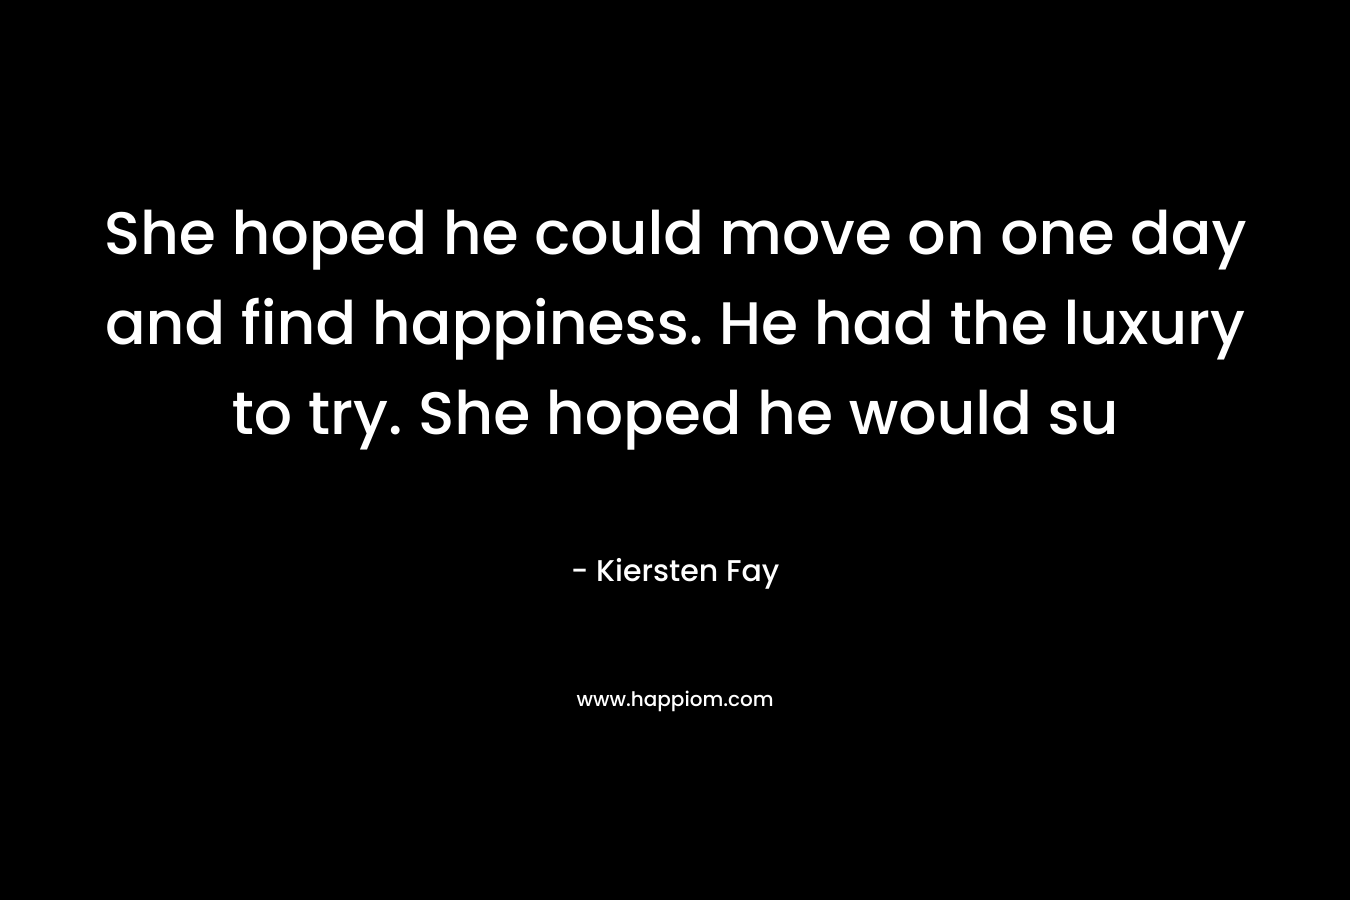 She hoped he could move on one day and find happiness. He had the luxury to try. She hoped he would su – Kiersten Fay